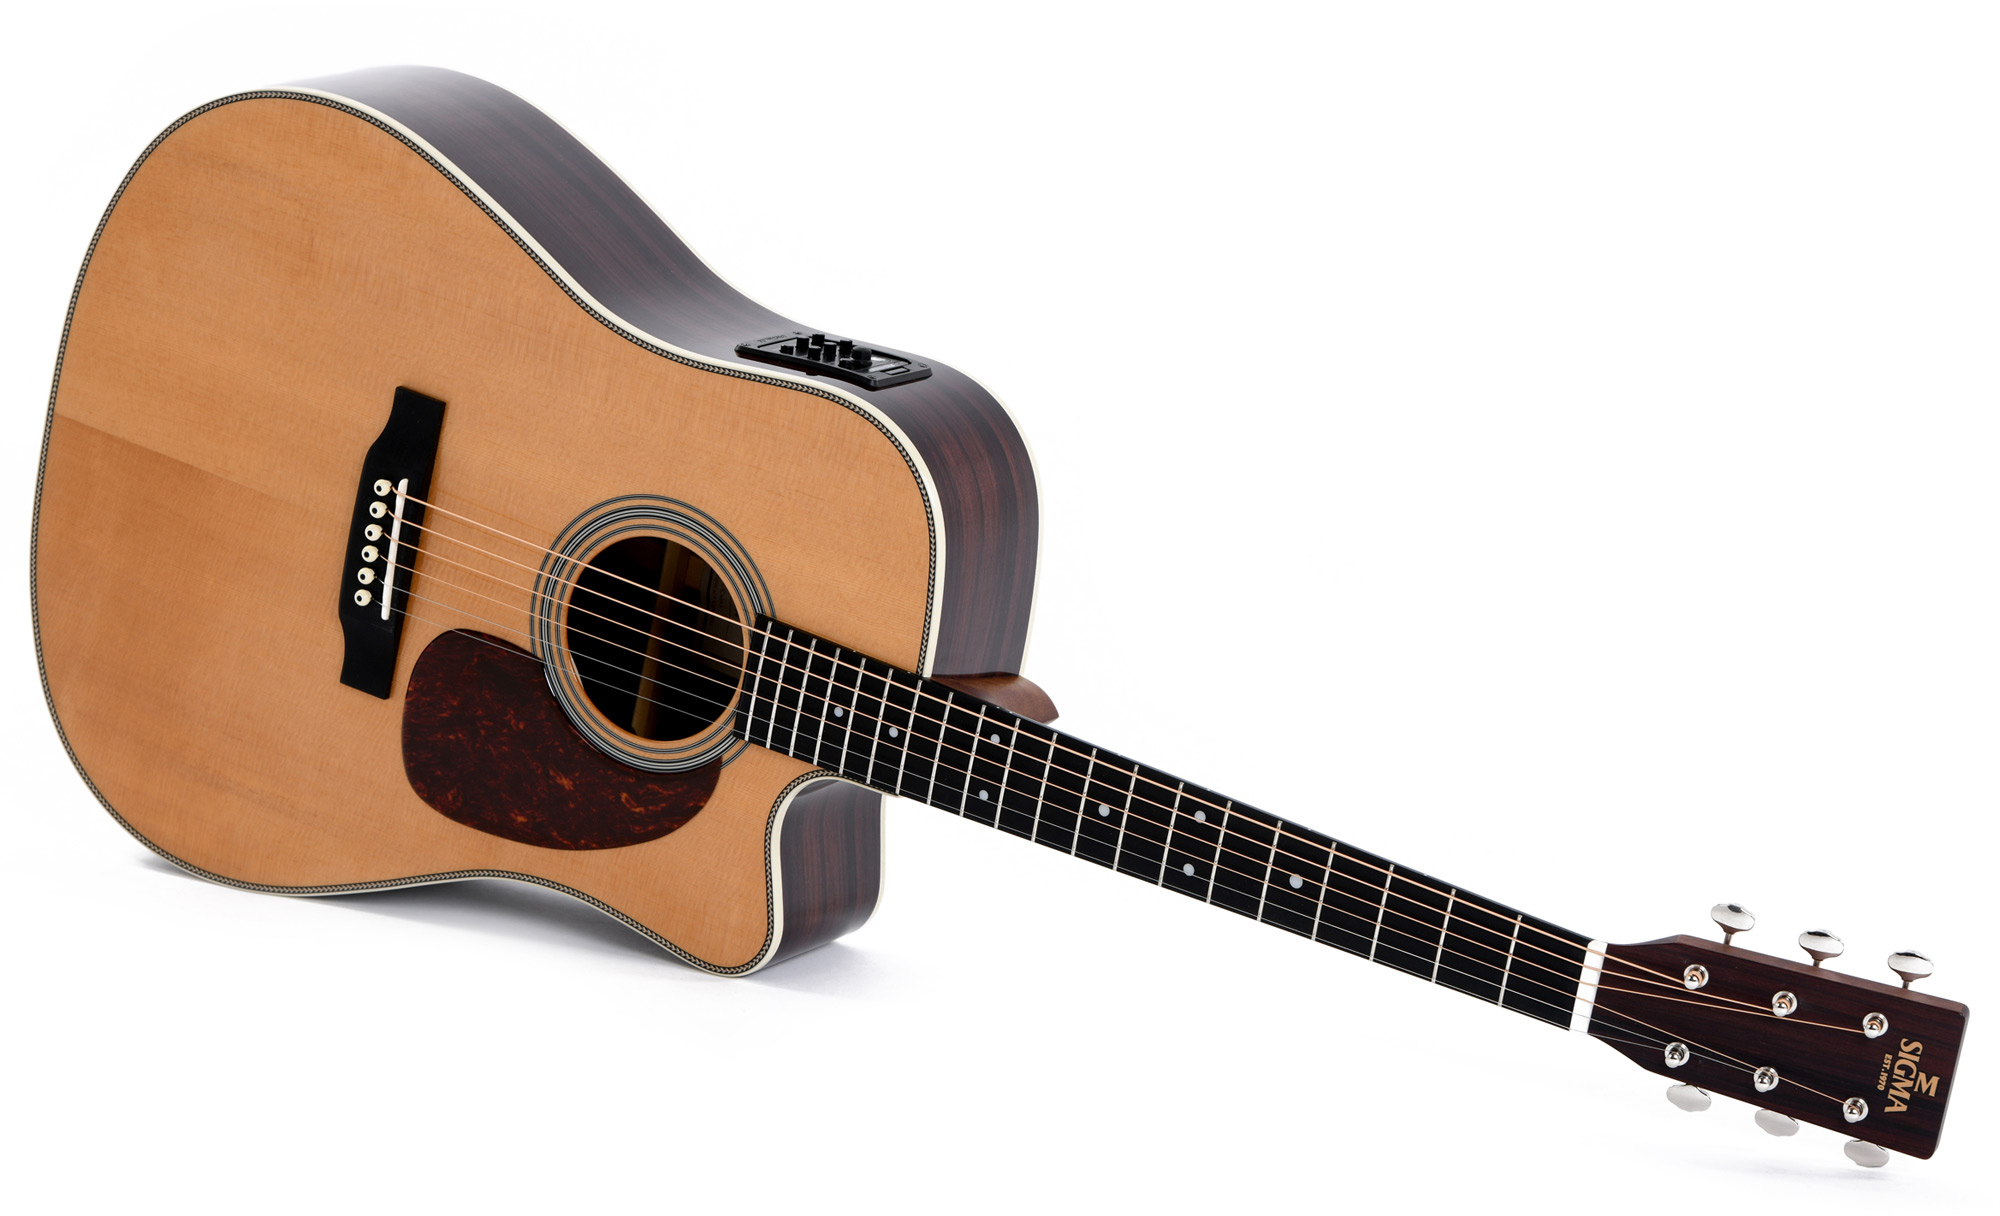 Sigma Dtc-28he Standard Dreadnought Cw Electro Epicea Eb - Natural - Electro acoustic guitar - Variation 2